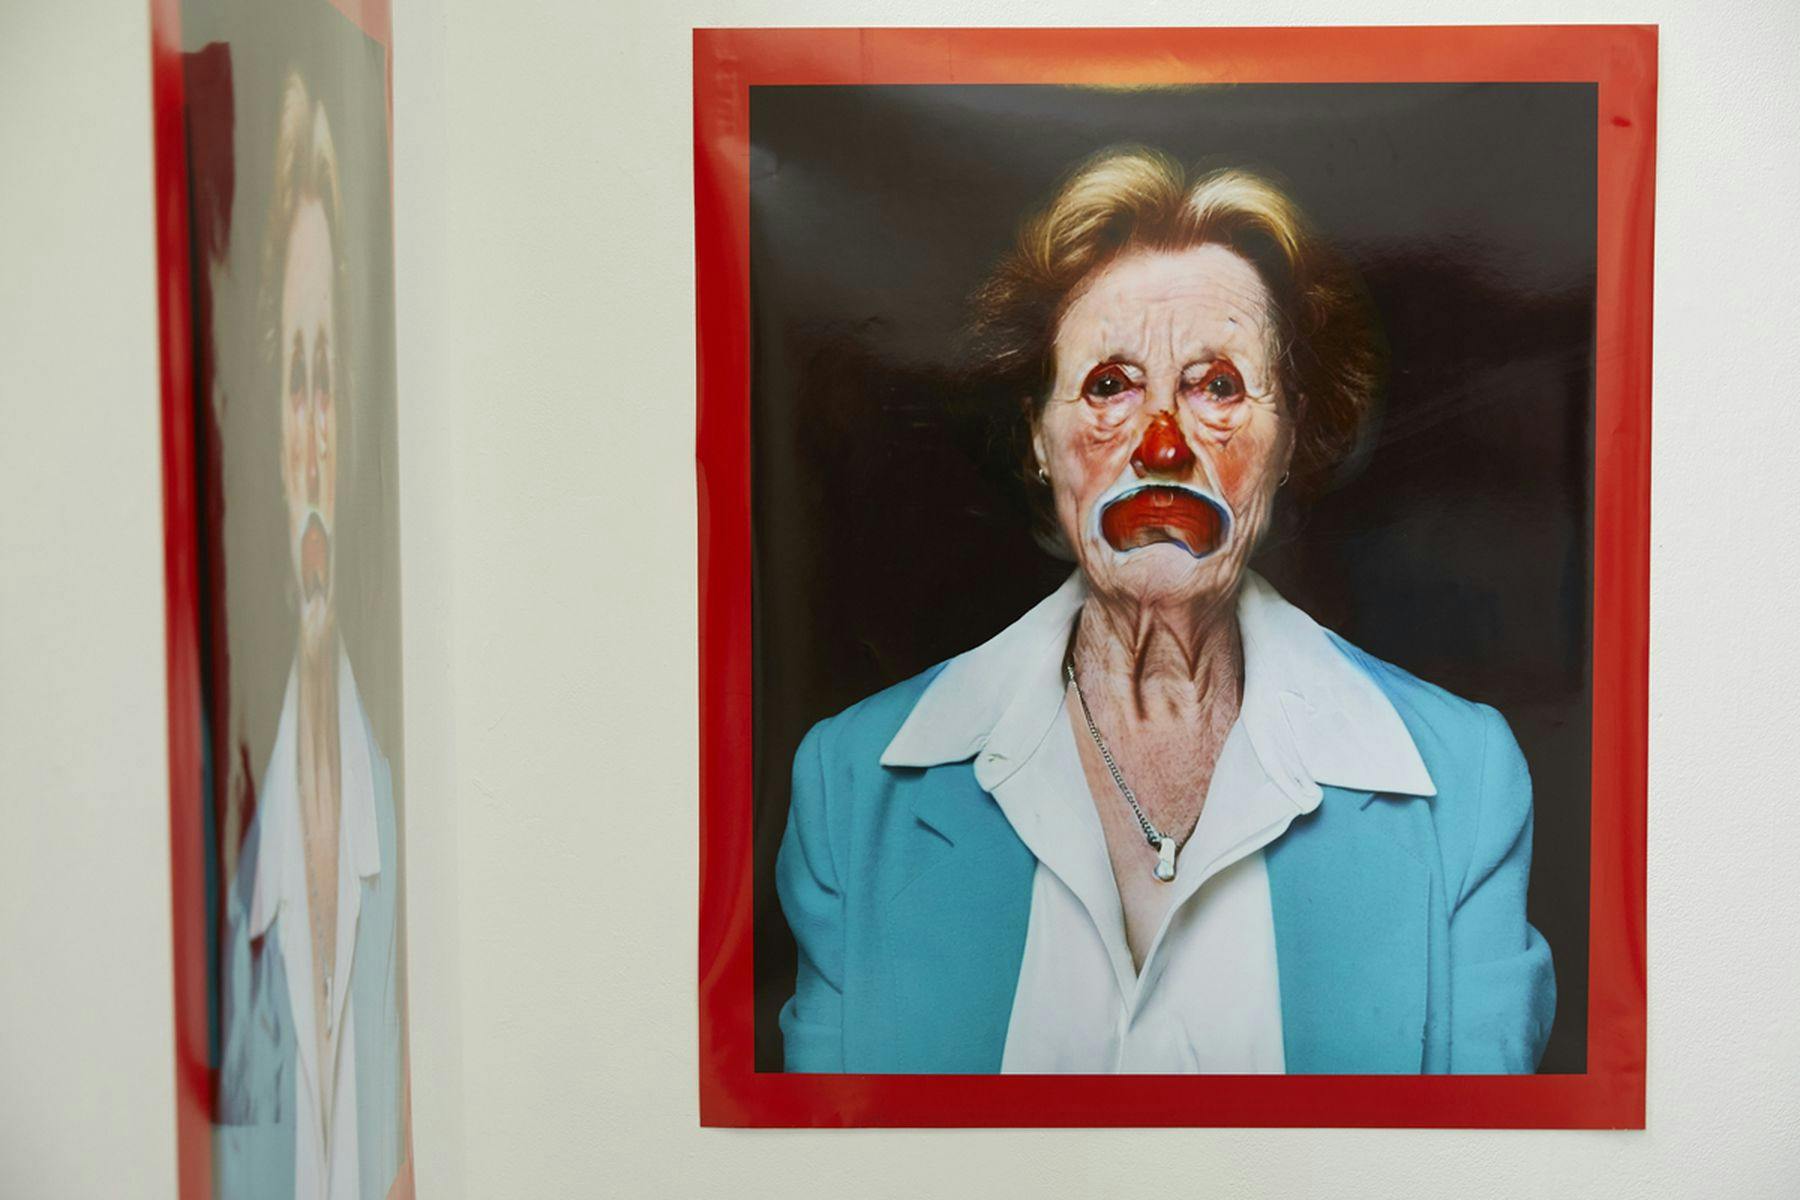 A photograph featuring an image of a person in clown makeup mounted against a white wall. They have a downturned unhappy expression and are wearing a white shirt and blue jacket. The image has a black background and is surrounded by a red frame. The side wall has the same image.